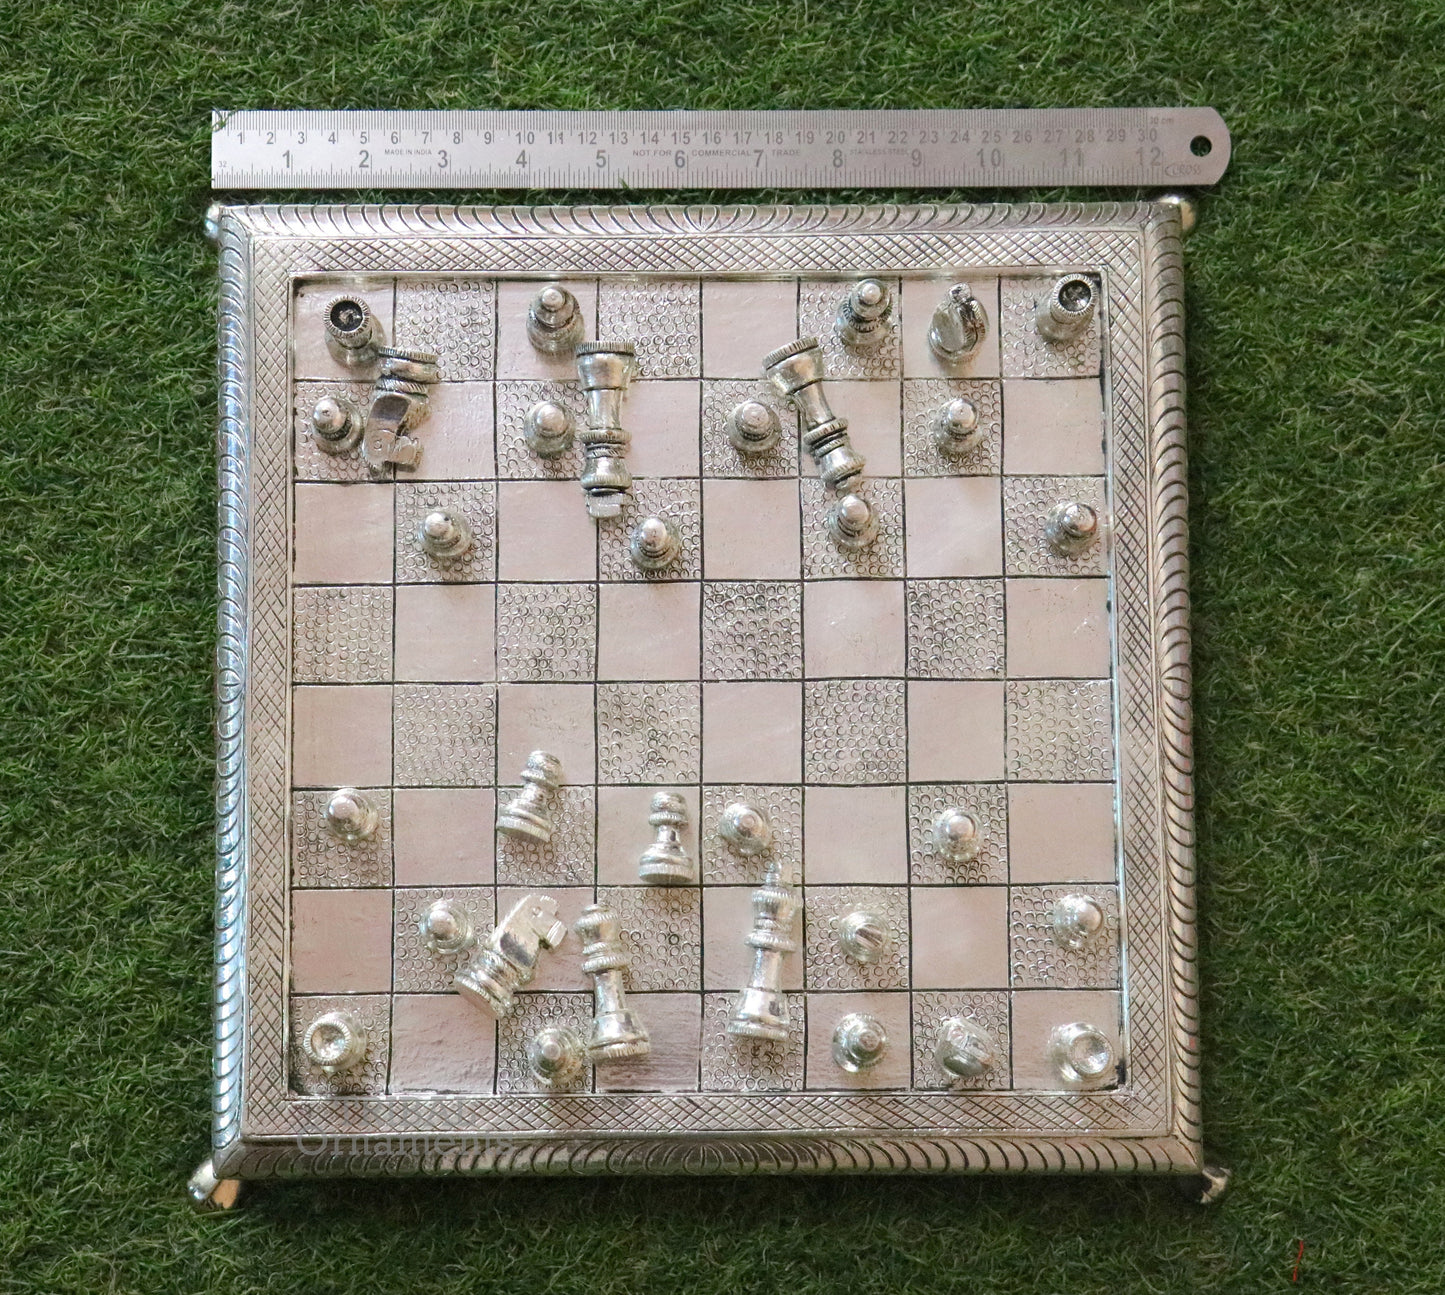 12" x 12" 925 sterling silver work chessboard, Amazing handcrafted design on wooden base, fabulous Royal silver article from india fr13 - TRIBAL ORNAMENTS